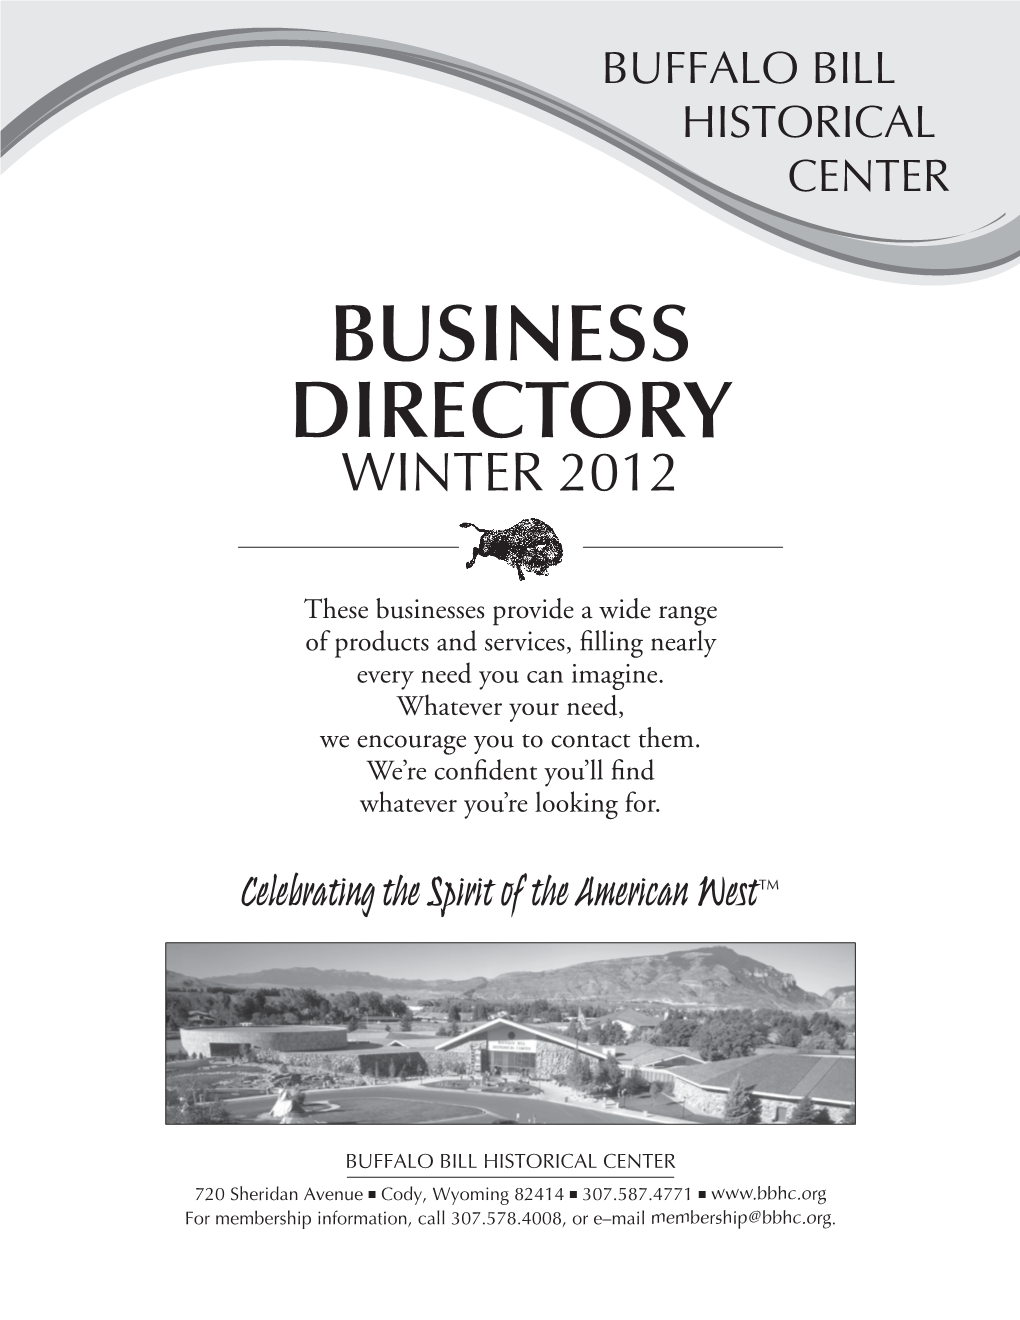 Business Directory Winter 2012